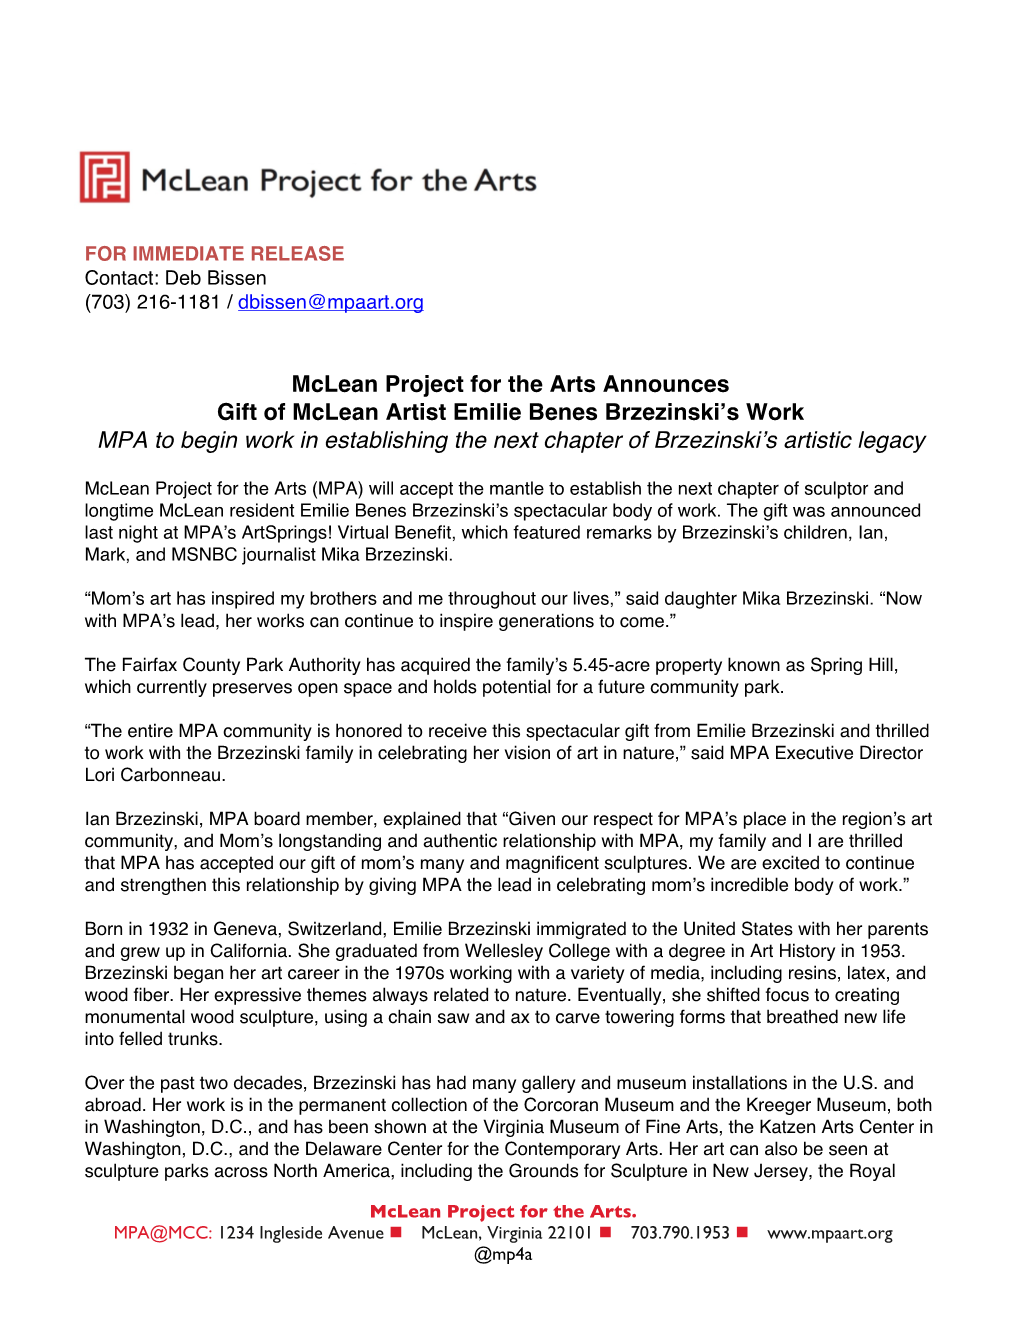 Mclean Project for the Arts Announces Gift of Mclean Artist Emilie